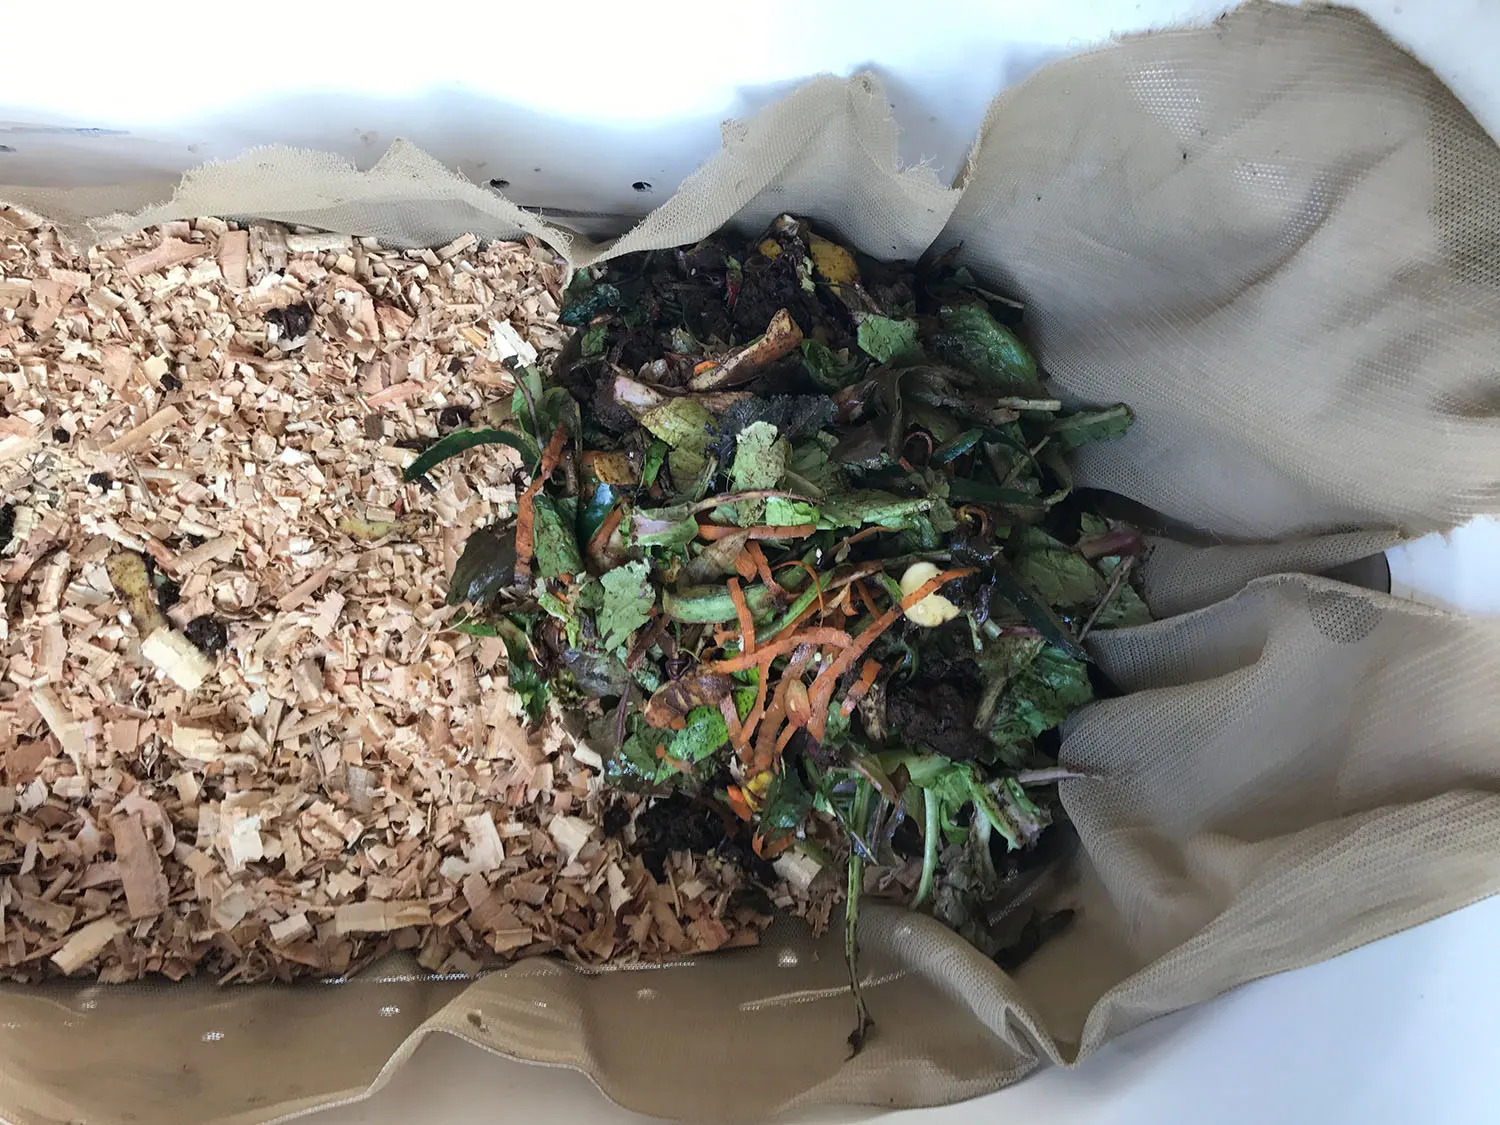 Garden cuttings and bark chips